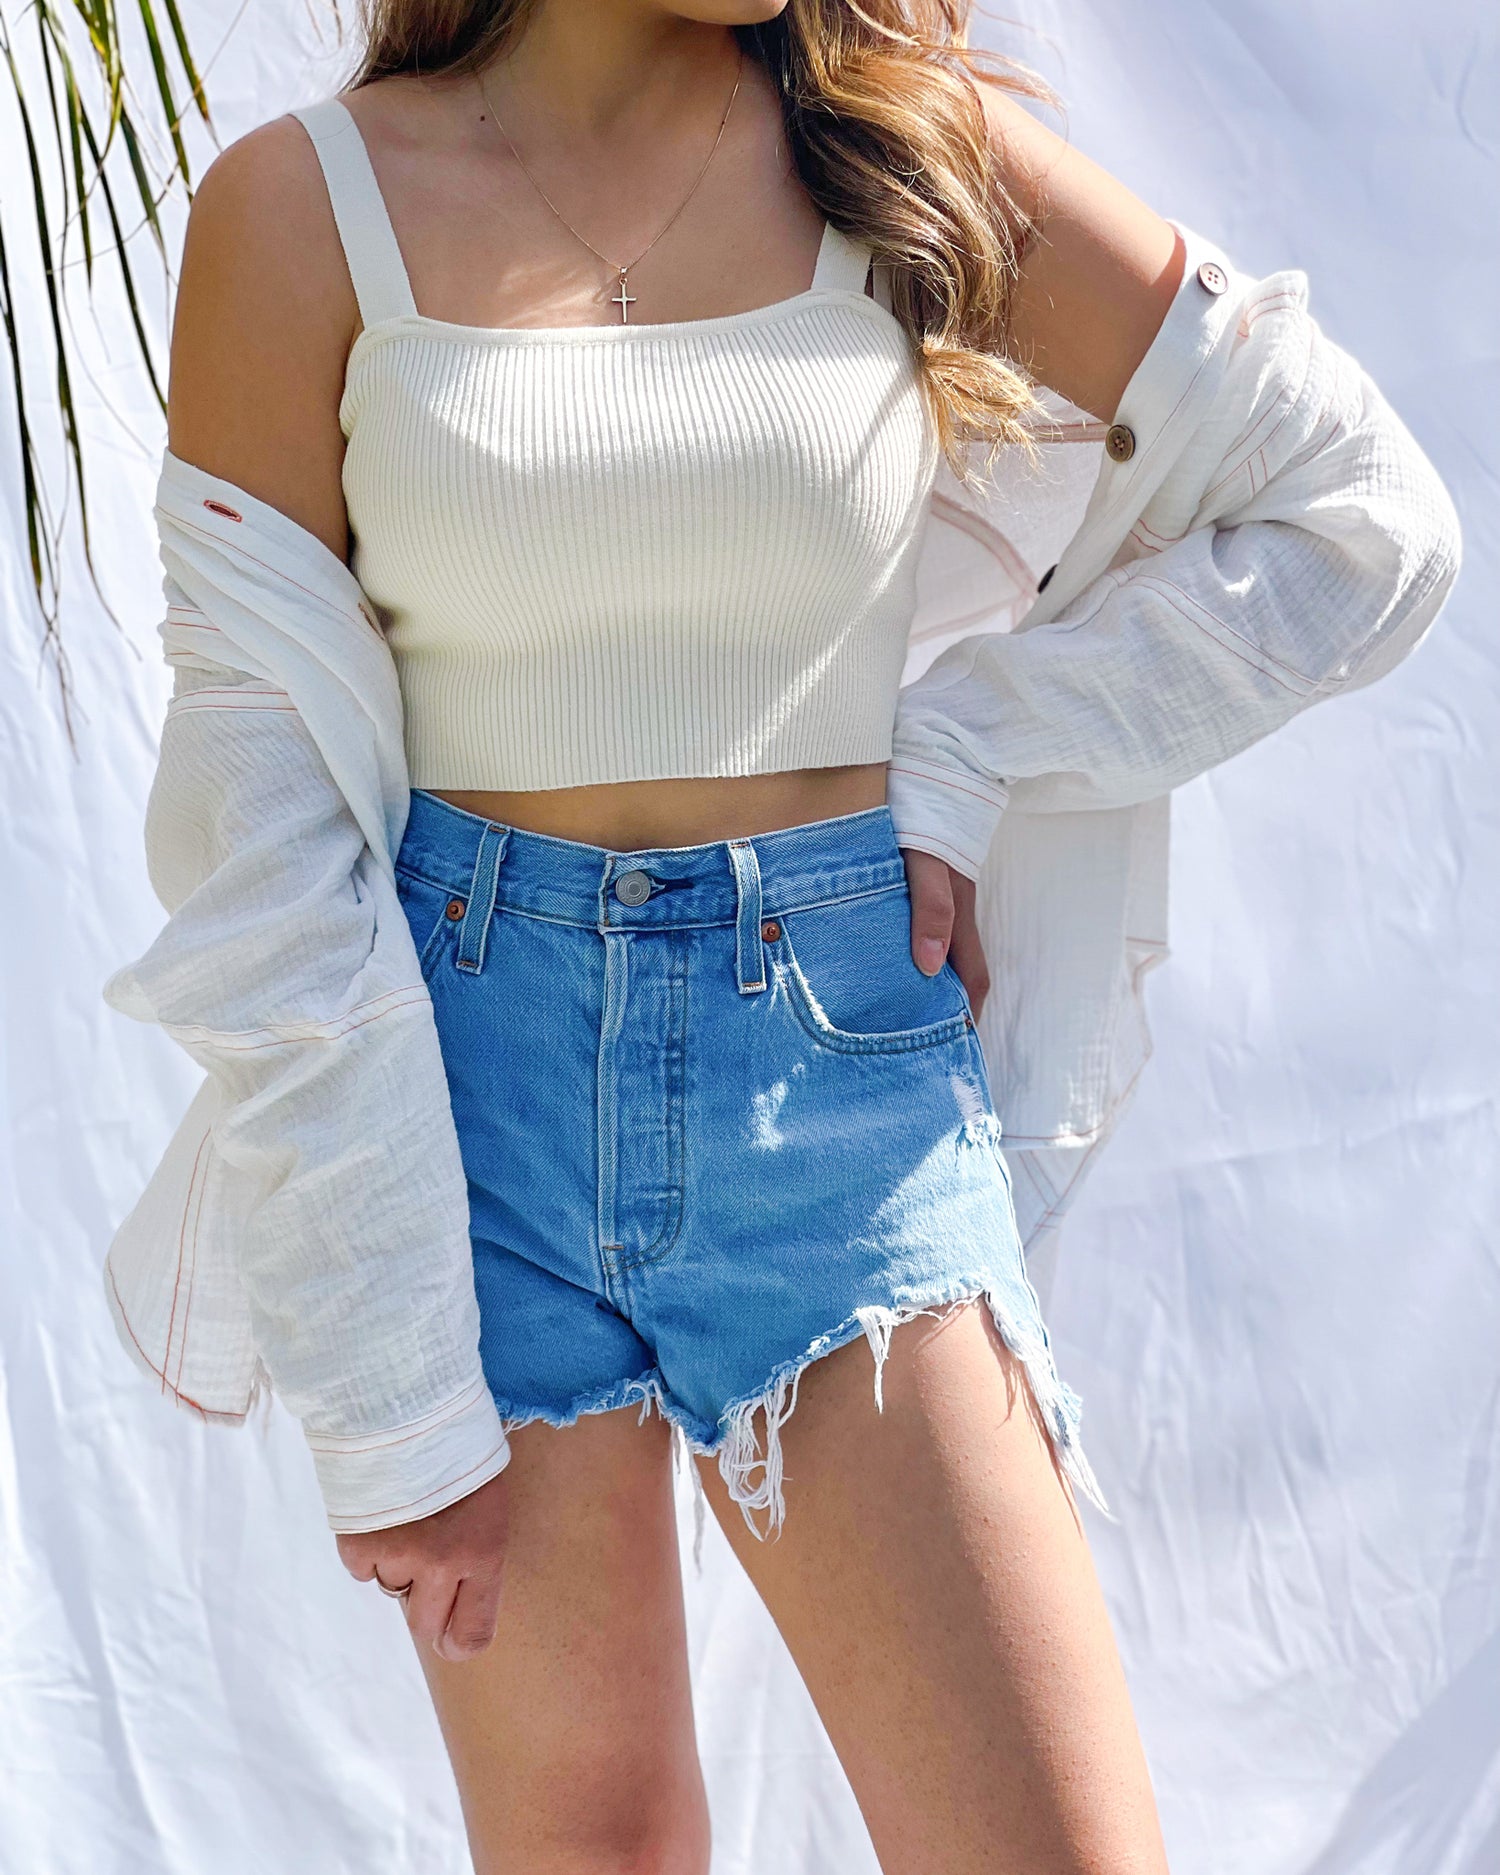 A latina model is wearing an off-white ribbed knit crop top. It has a square neckline and wide shoulder straps. She is modeling it with denim shorts and a white pull-over oversized shirt. 